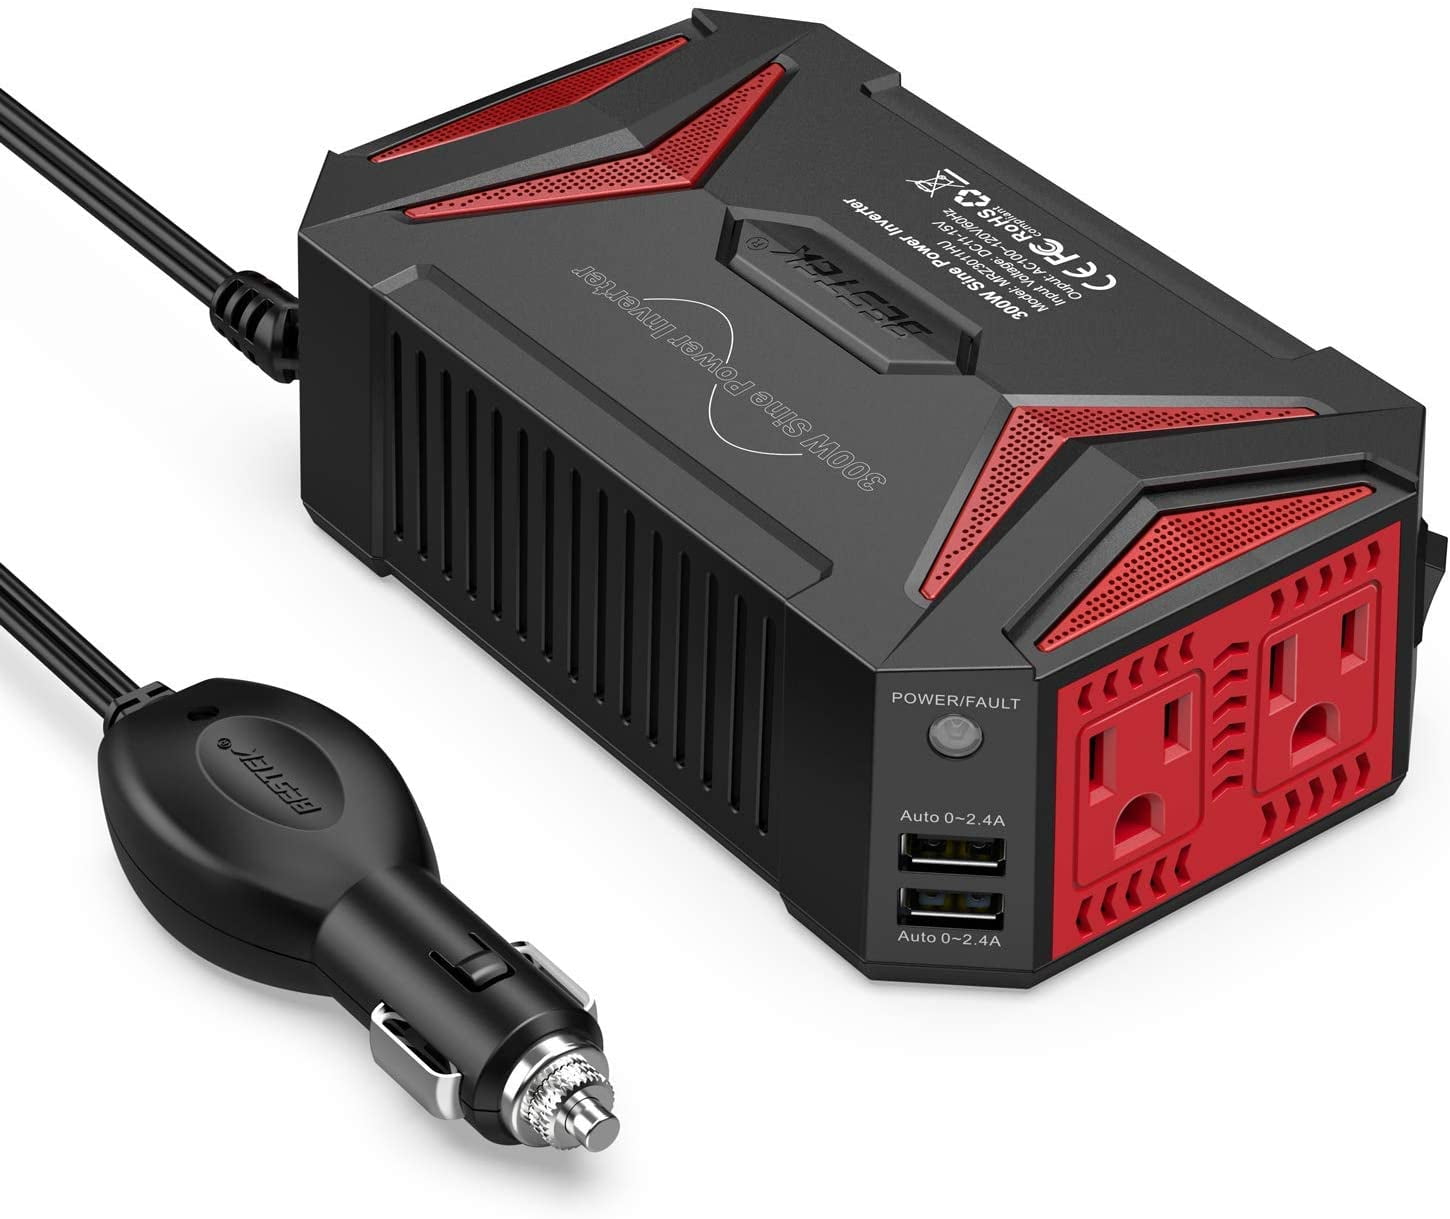 BESTEK DC AC 150W Car Power Inverter Laptop Adapter Cell Phone Dual USB Chargers